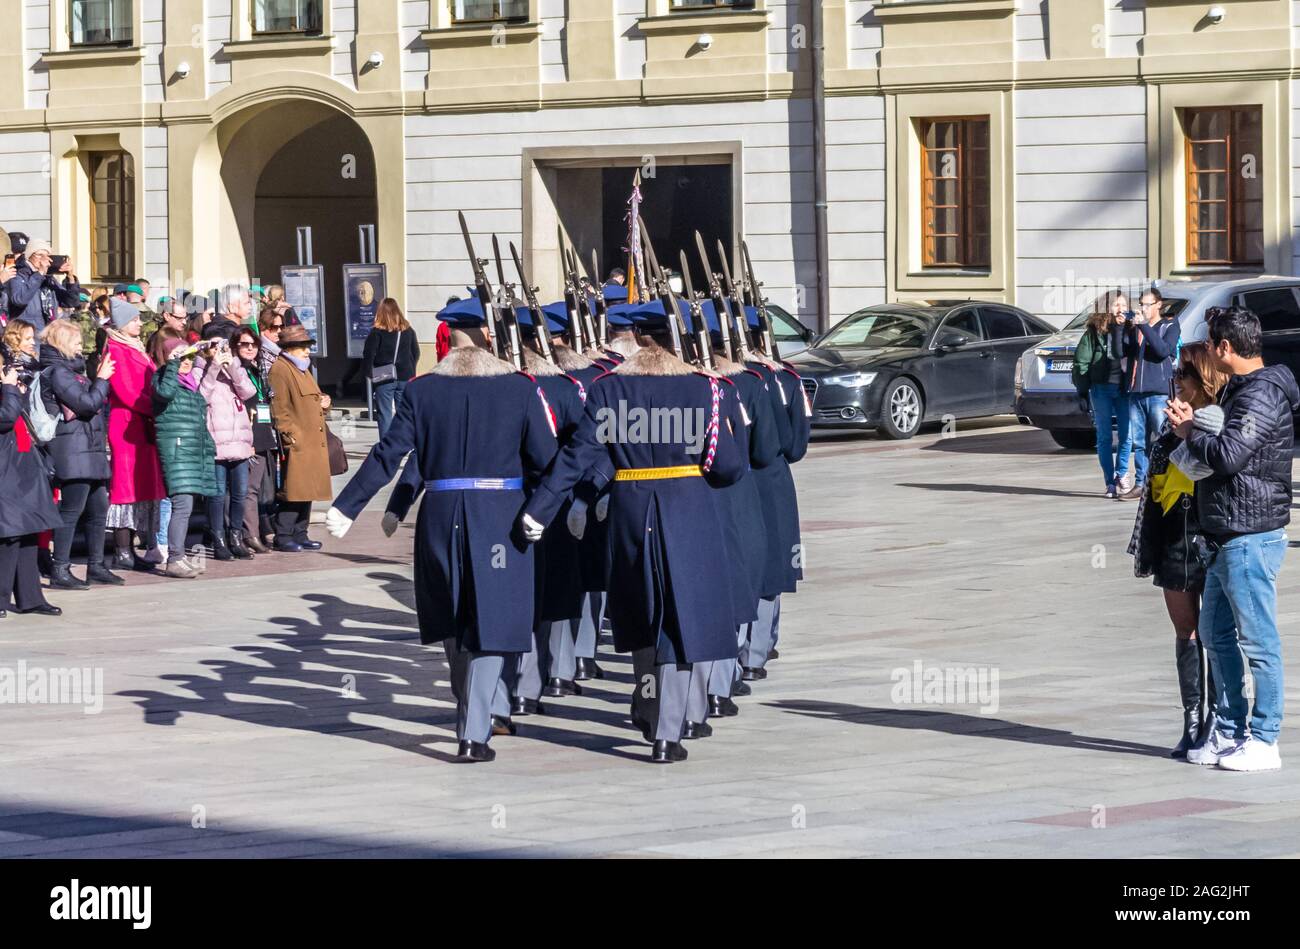 PRAGUE, CZECH REPUBLIC - FEBRUARY 15: Servicemen's from the Prague Castle Guard march to the ceremony of changing the guard of honor at February 15, 2 Stock Photo